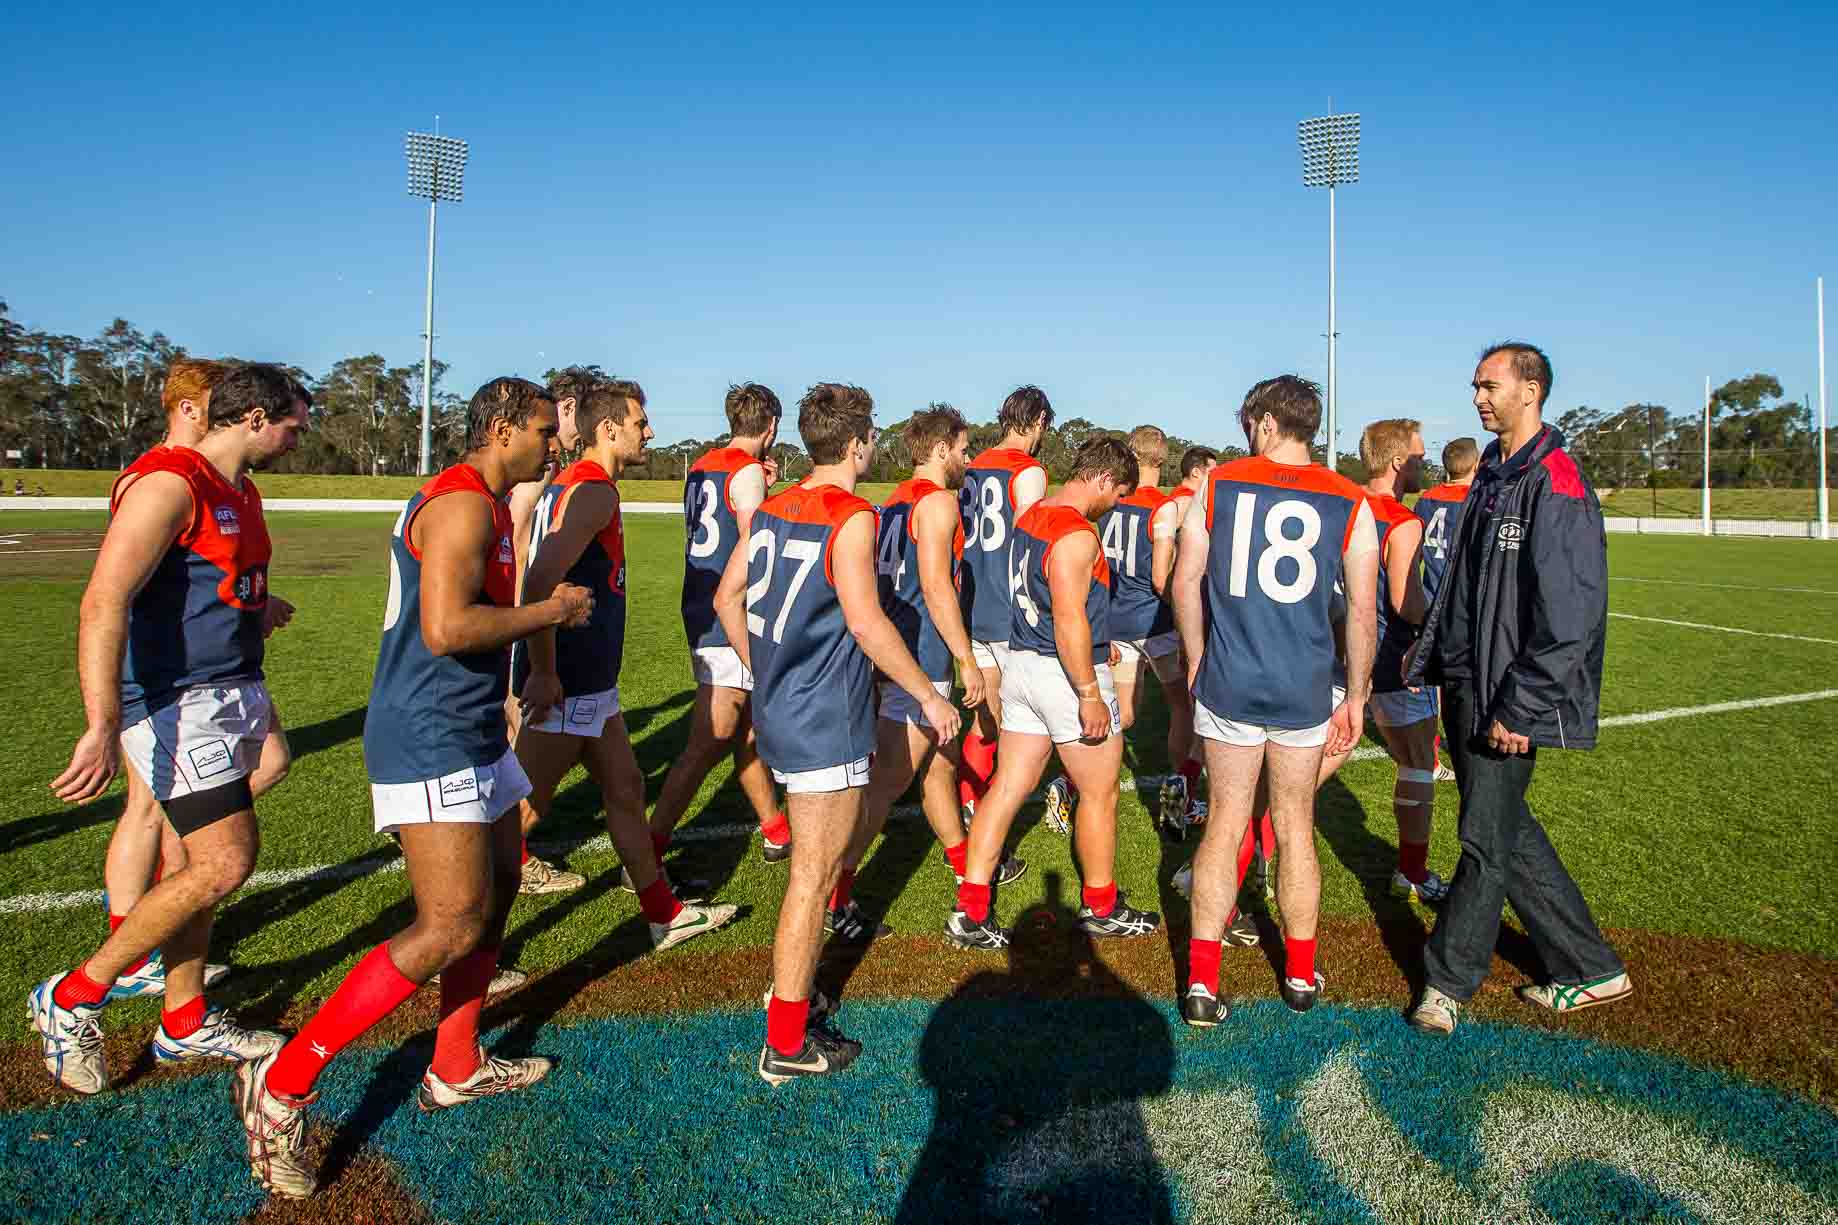 The Manly Warringah Giants (8.20-68) defeat the Pennant Hills Demons (2.10-22) in the Grand Final of the AFL Sydney Mens Premier Division competition